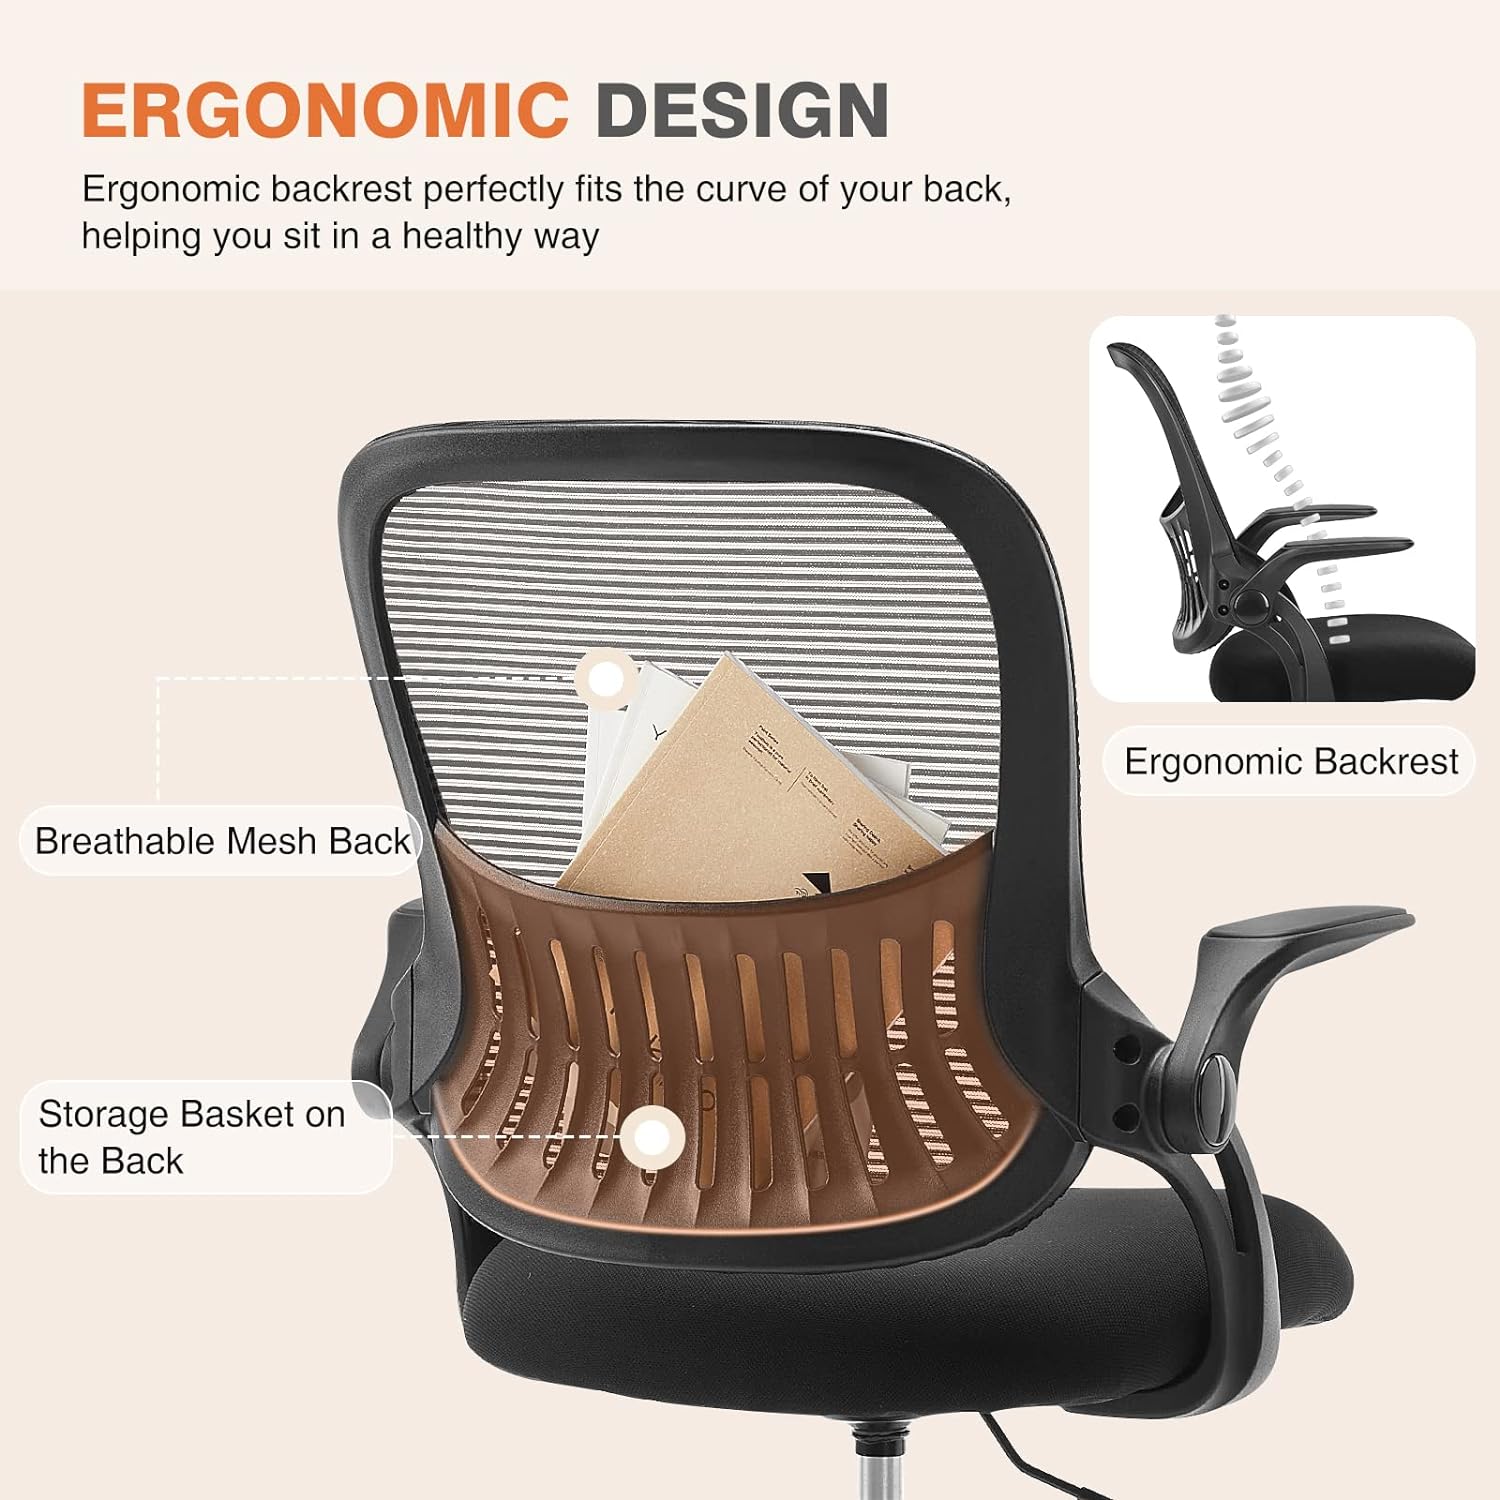 Breathable Mesh Desk Chair, Lumbar Support With Flip-Up Arms, 1